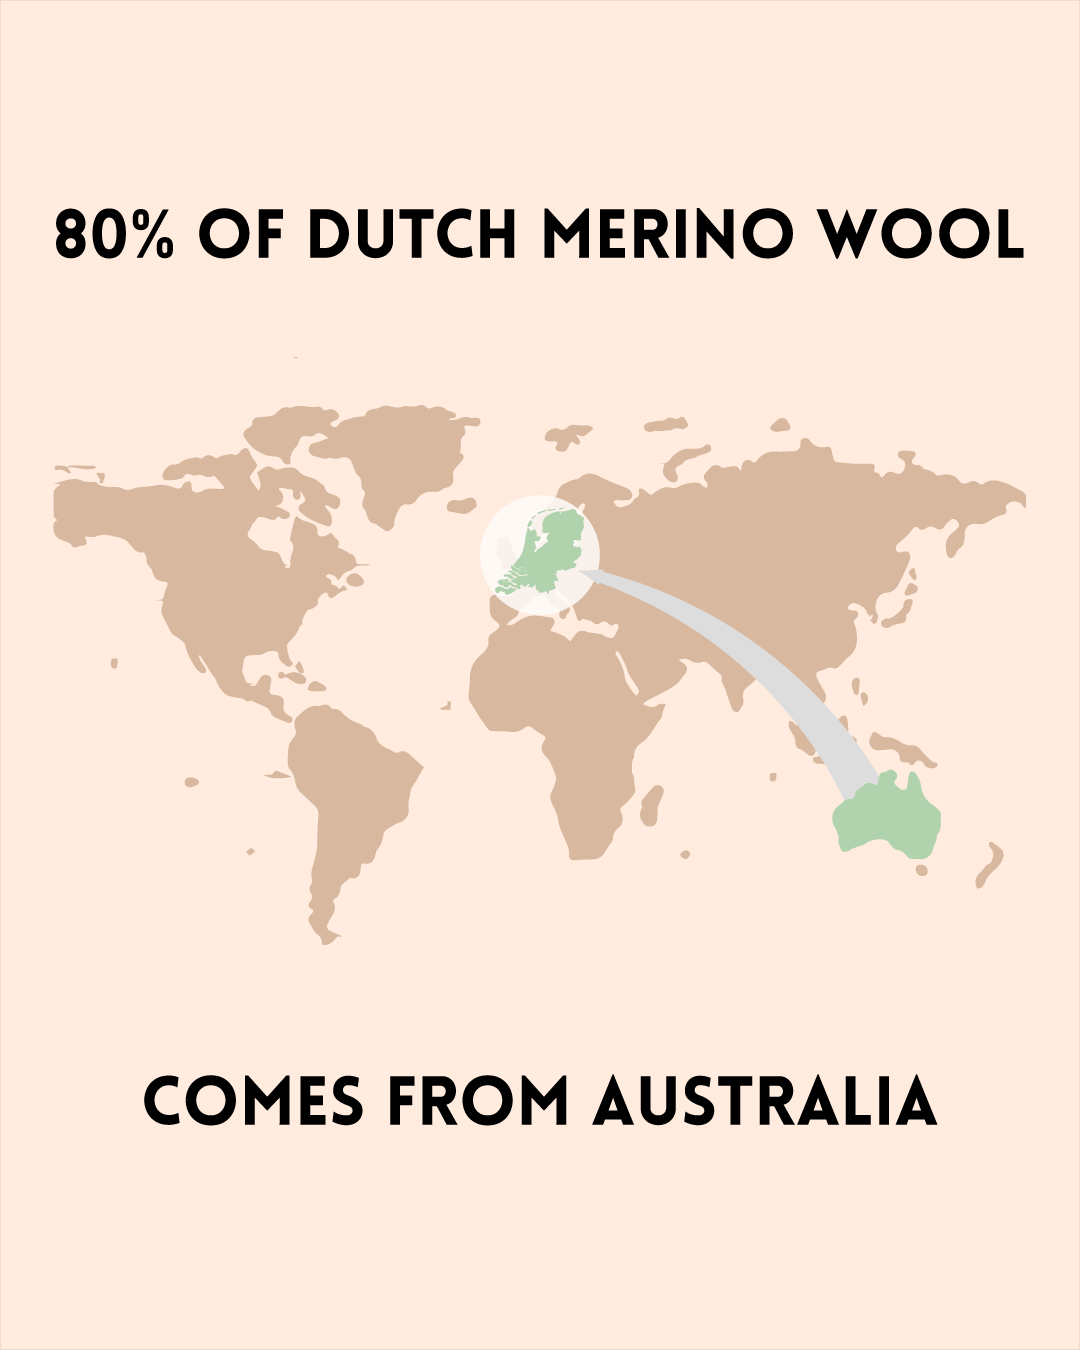 imports from Australia to the Netherlands